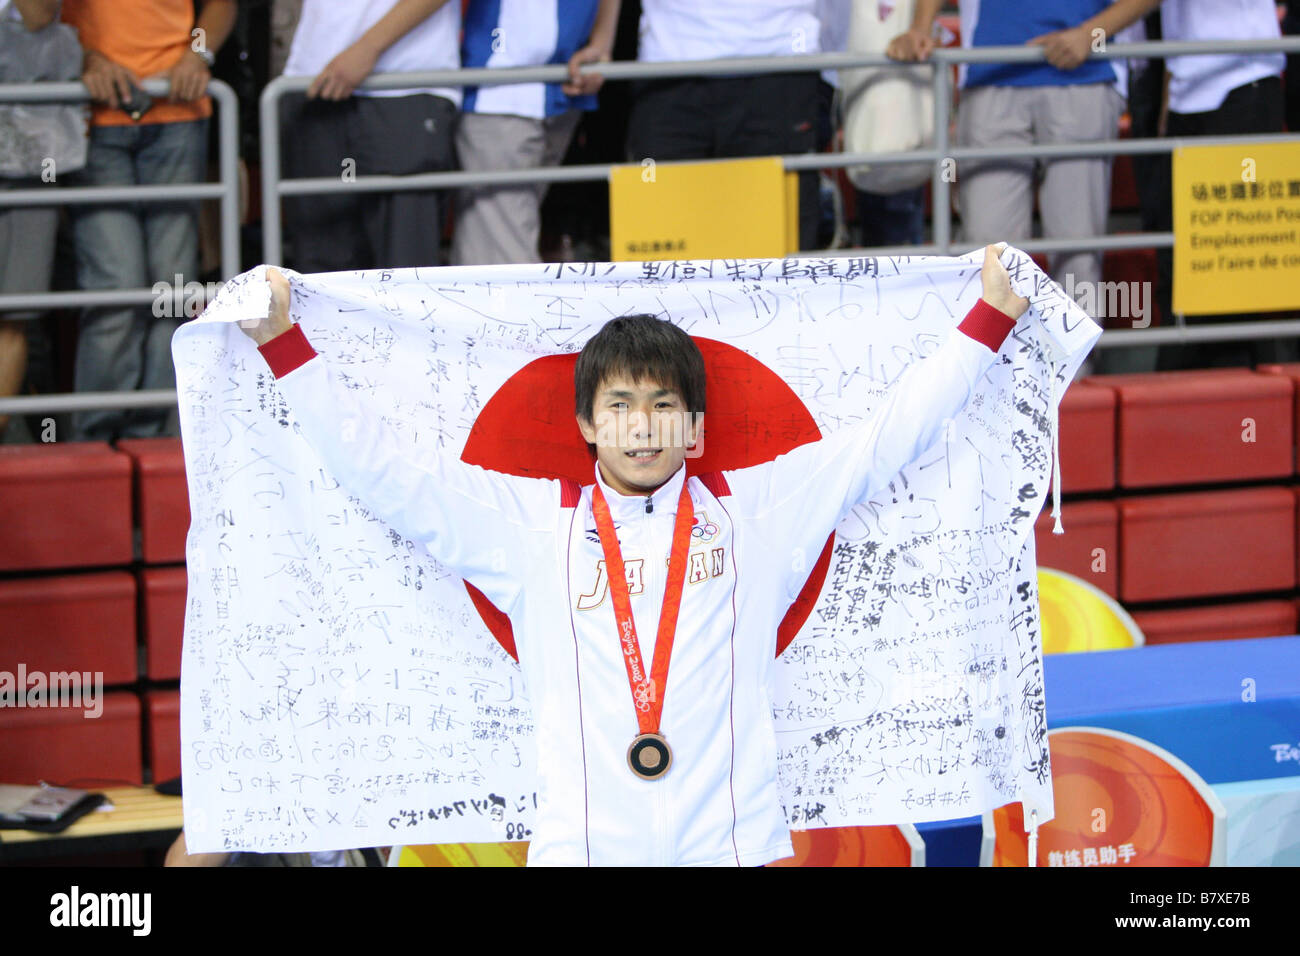 Kenichi Yumoto JPN AUGUST 19 2008 Wrestling celebrates bronze medal with japanese national flag after the mens 60kg freestyle wrestling event at the China Agriculture University Gymnasium on Day 11 of the Beijing 2008 Olympic Games on August 19 2008 in Beijing China Photo by Koji Aoki AFLO SPORT 0008 Stock Photo